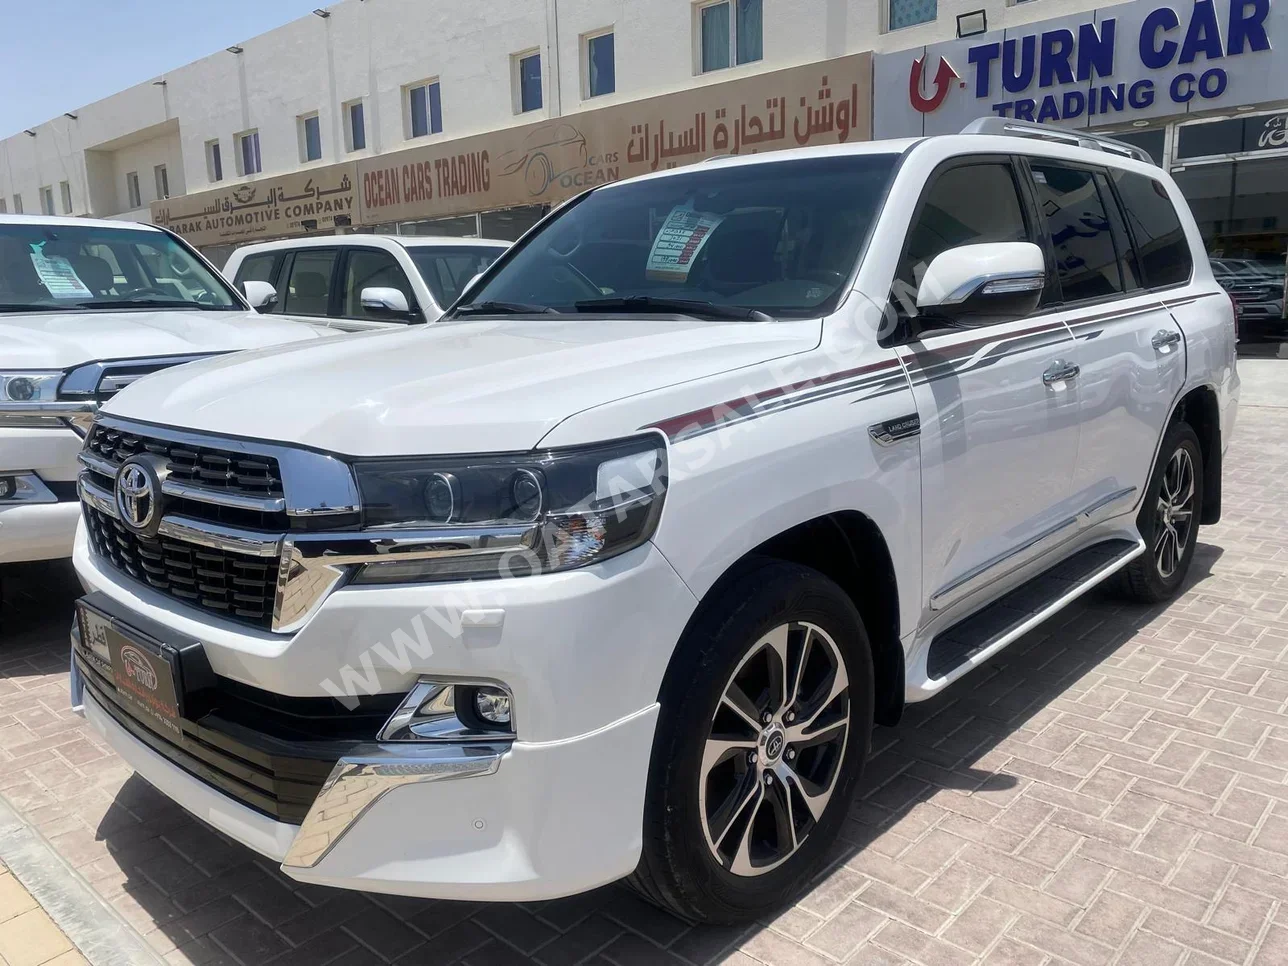 Toyota  Land Cruiser  GXR- Grand Touring  2021  Automatic  94٬000 Km  6 Cylinder  Four Wheel Drive (4WD)  SUV  White